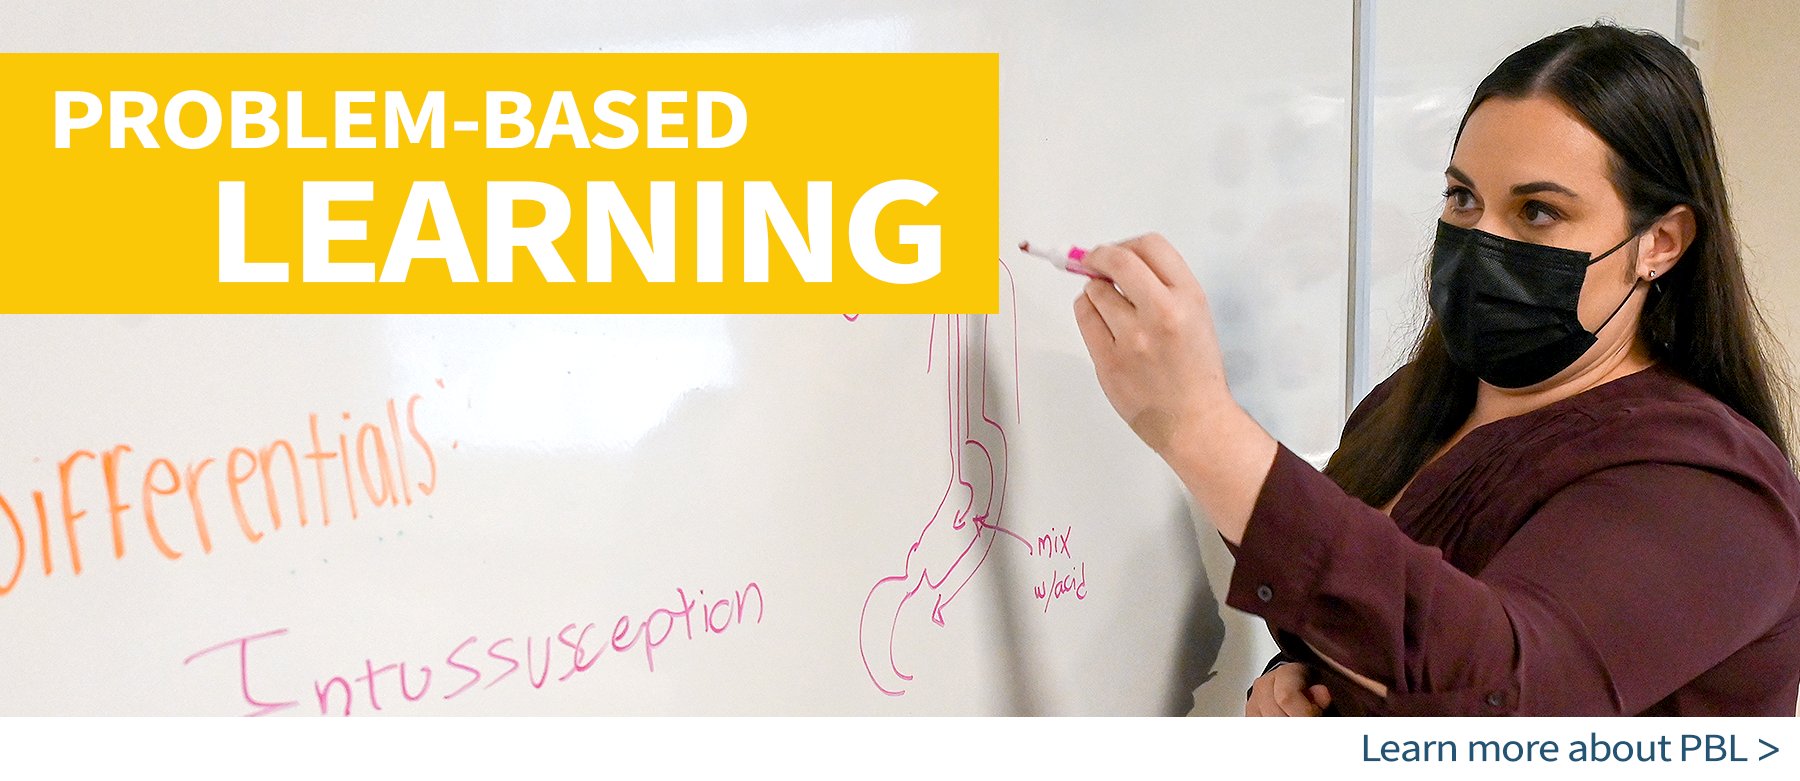 What is problem-based learning? Click here to learn more